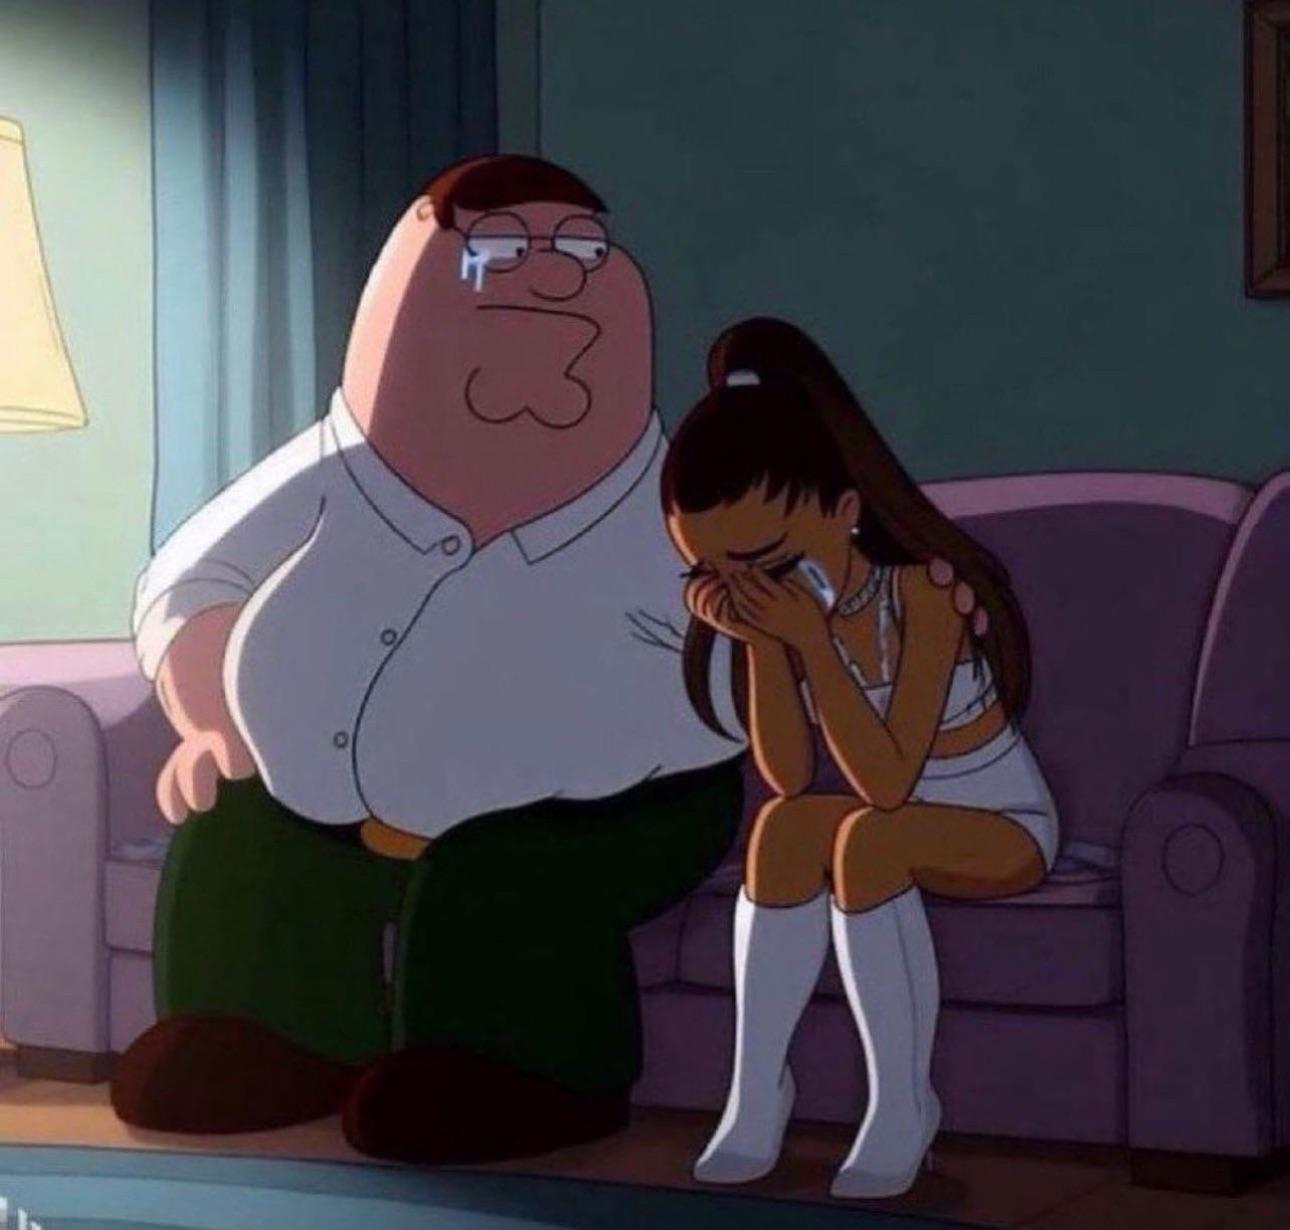 Peter Griffin Comforting Ariana Grande Crying On Couch meme Blank Meme Template